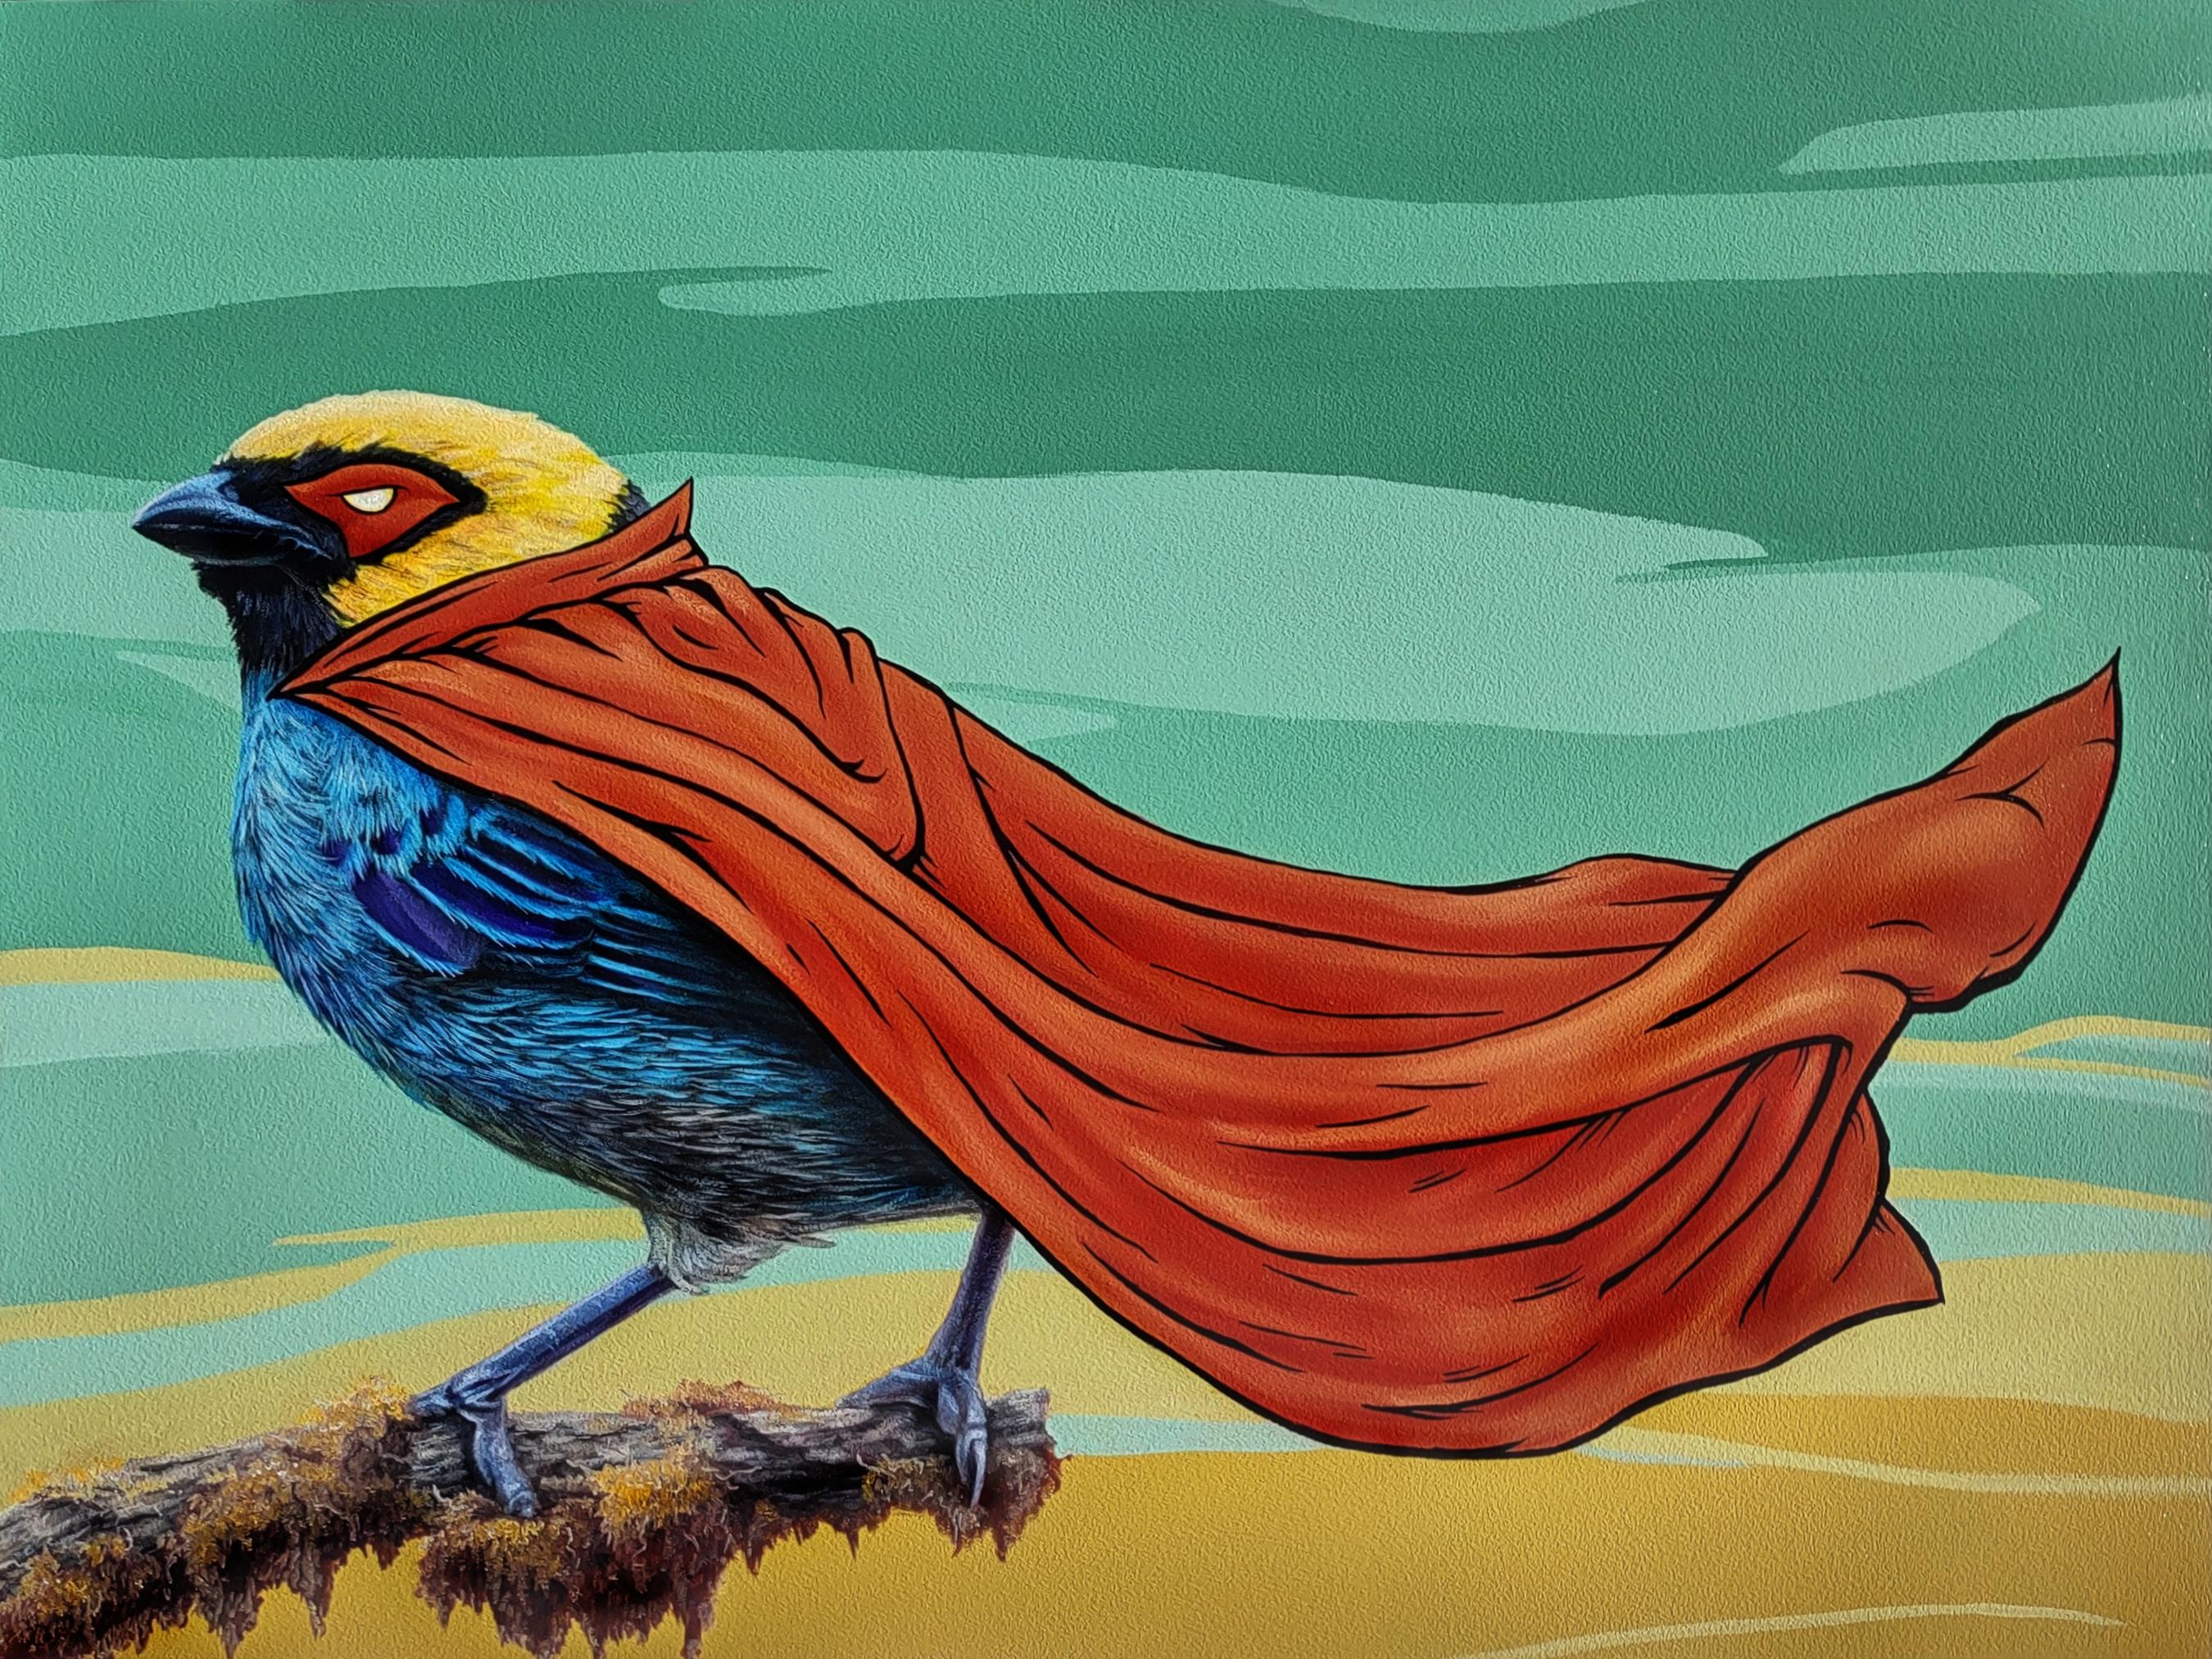 "Masks We Wear, For Anonymity", Bird with Red Cape Oil Painting